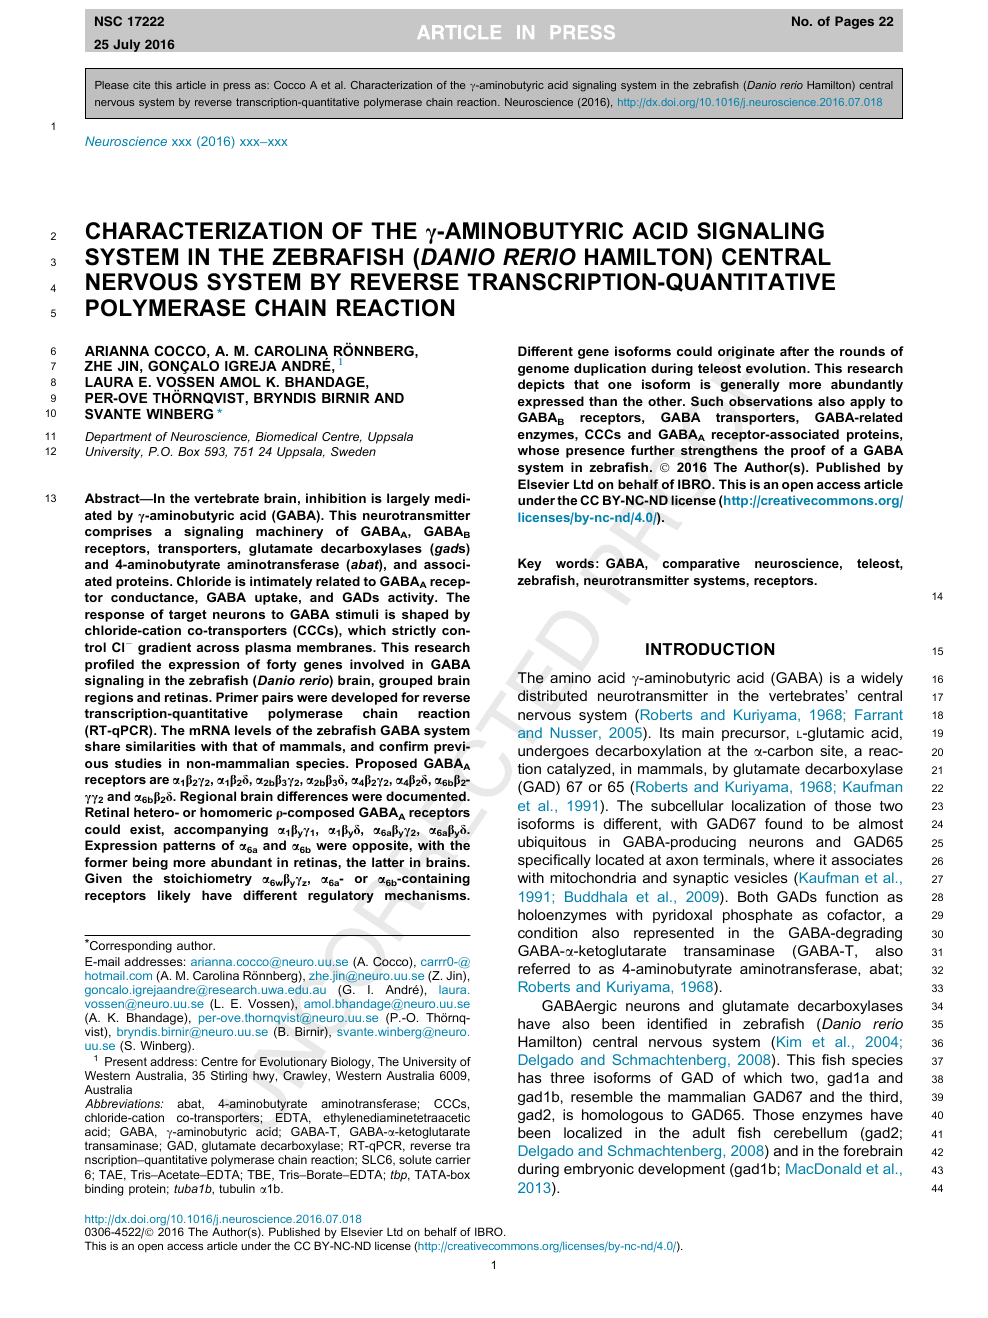 Characterization Of The G Aminobutyric Acid Signaling System In The Zebrafish Danio Rerio Hamilton Central Nervous System By Reverse Transcription Quantitative Polymerase Chain Reaction Topic Of Research Paper In Biological Sciences Download Scholarly